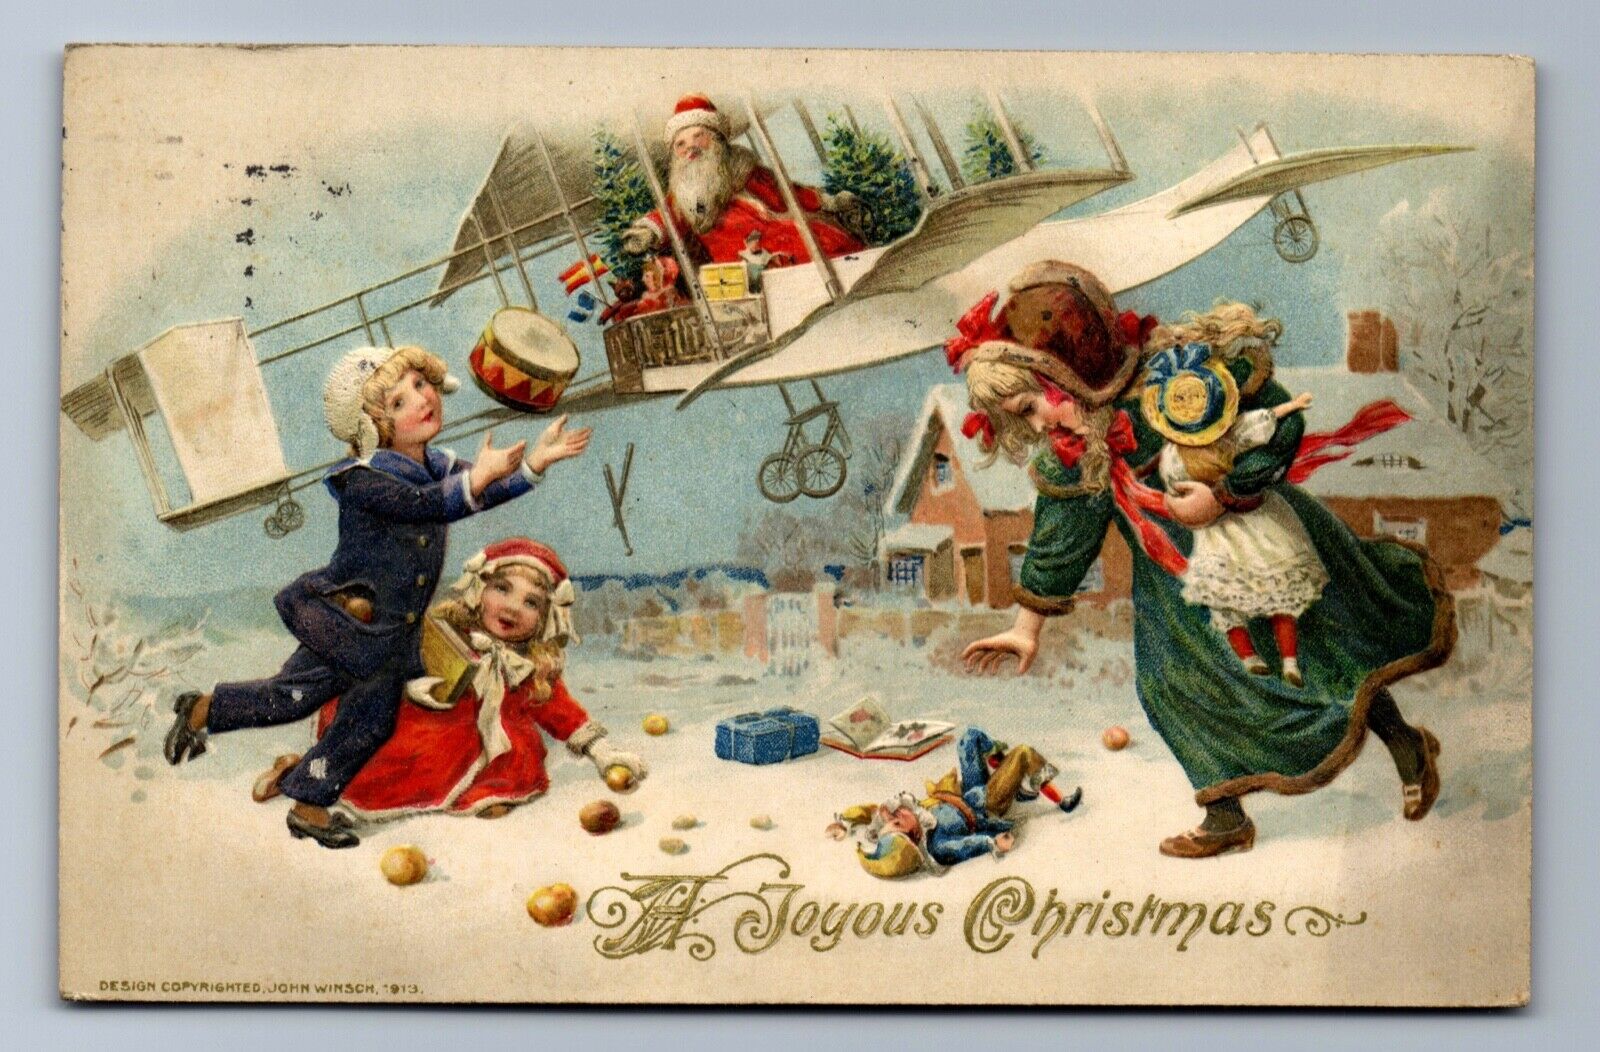 1913 WINSCH SANTA THROWING GIFTS FROM WHITE BIPLANE, CHILDREN XMAS Postcard PS